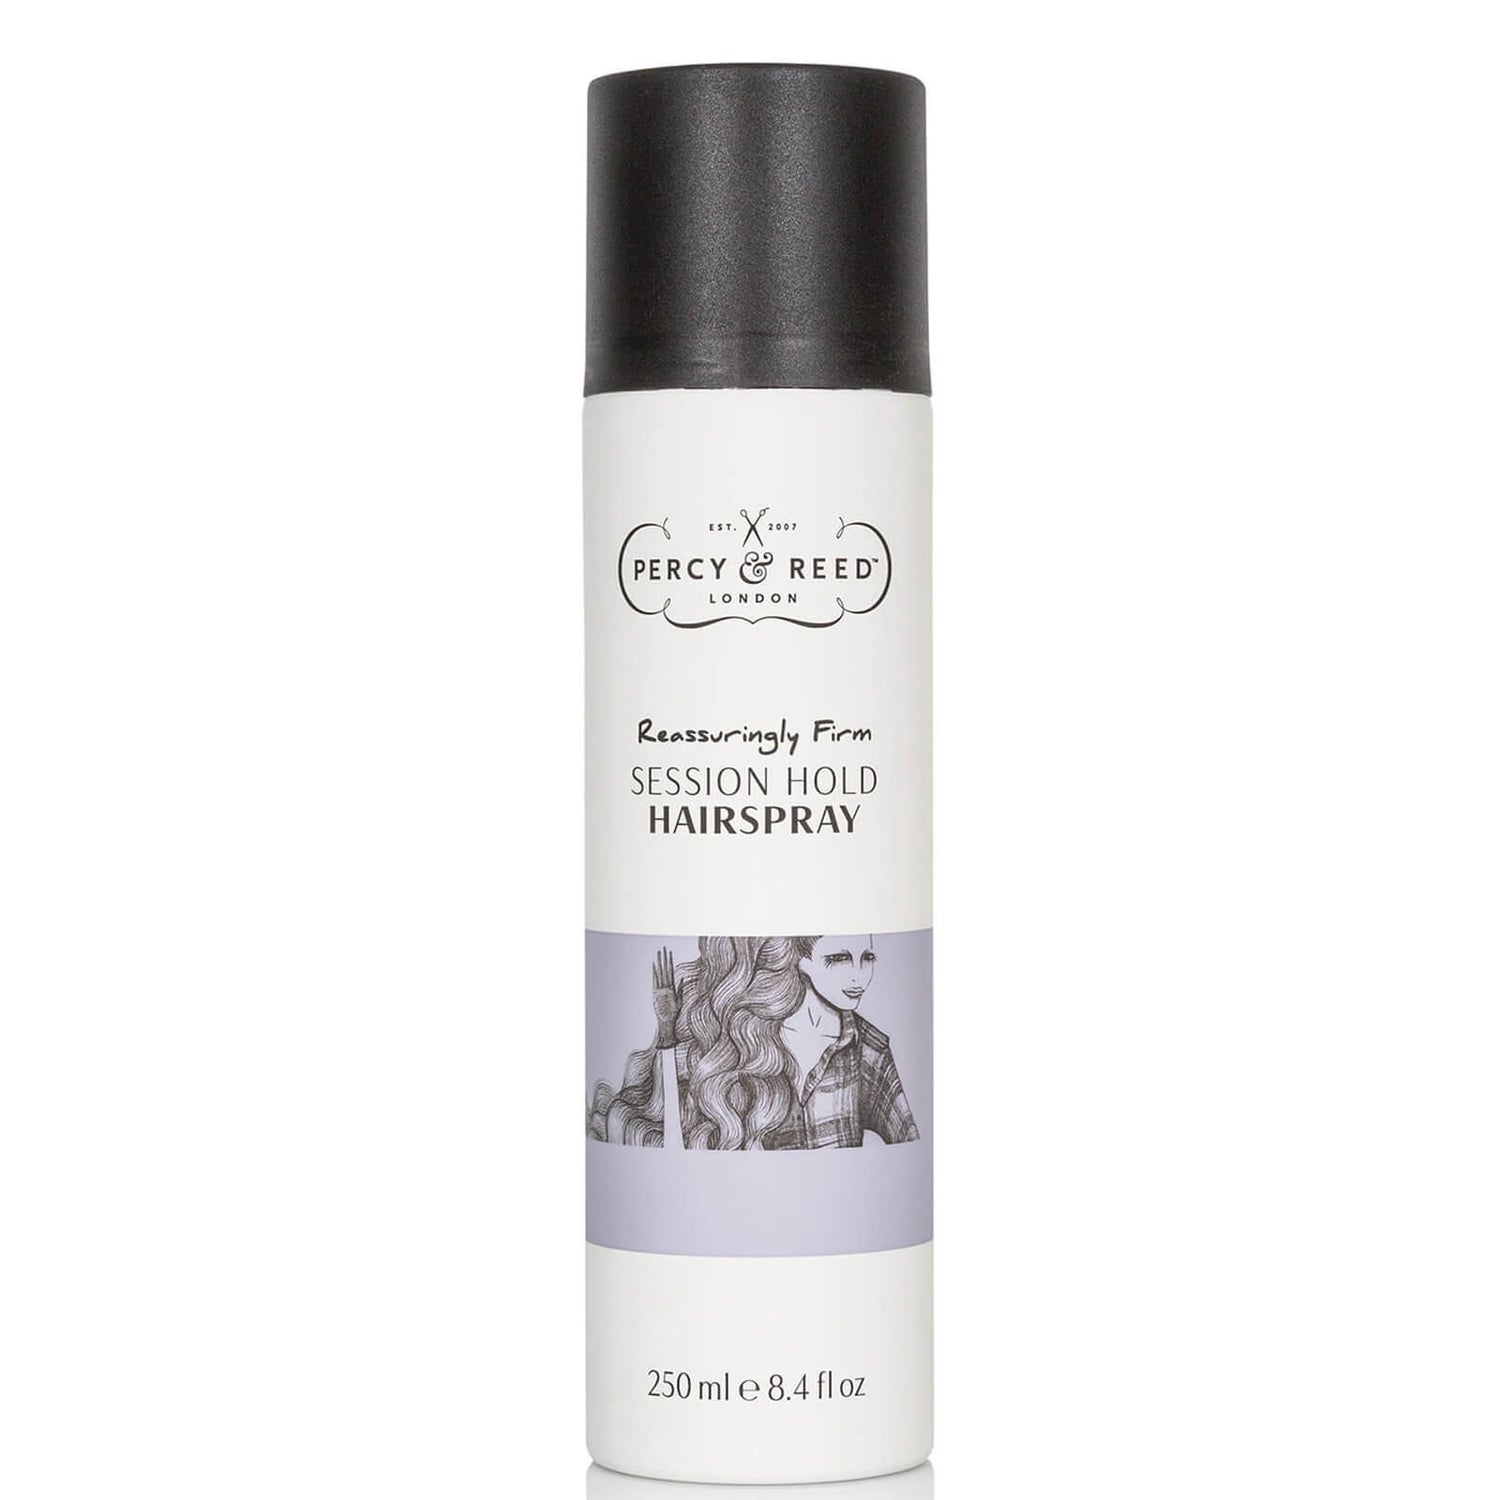 Percy & Reed Reassuringly Firm Session Hold Hairspray (250 ml)